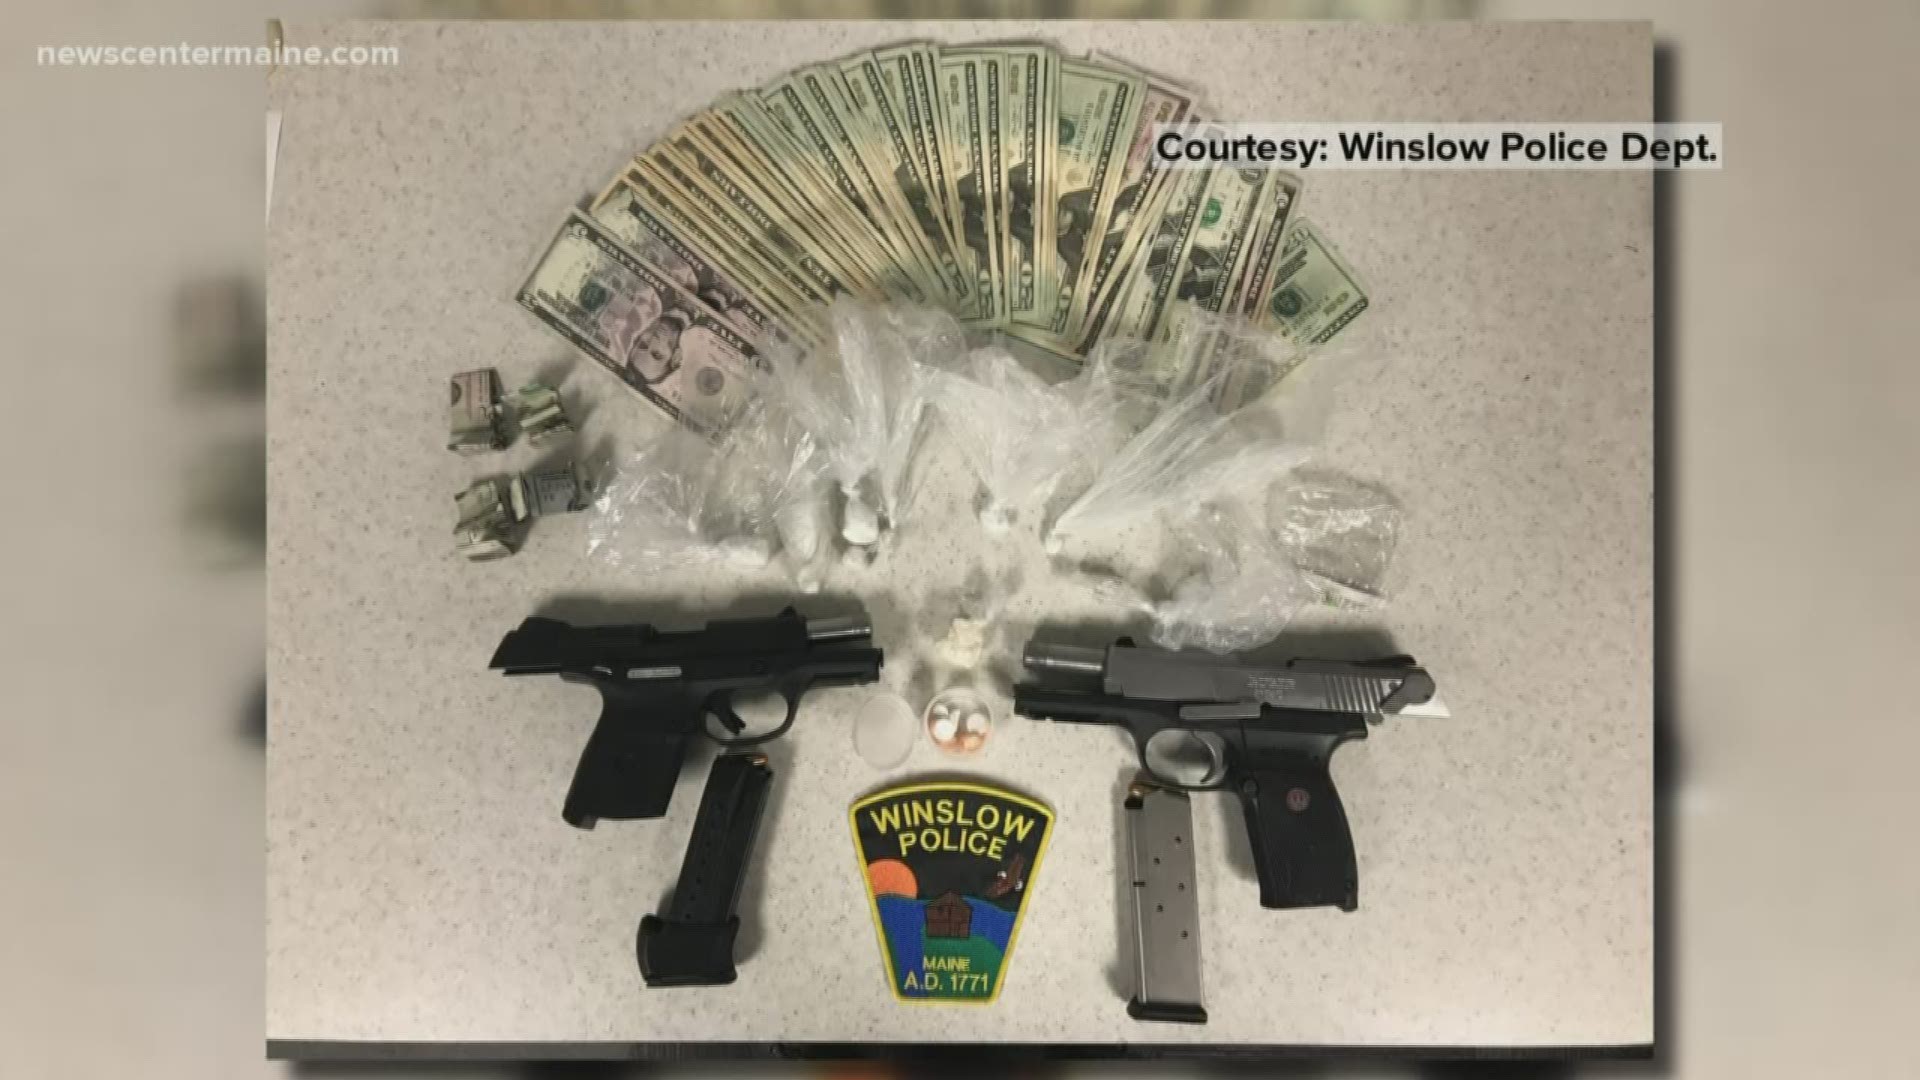 During the search of the vehicle, police found two loaded handguns, crack cocaine, LSD, suboxone, and oxycodone.